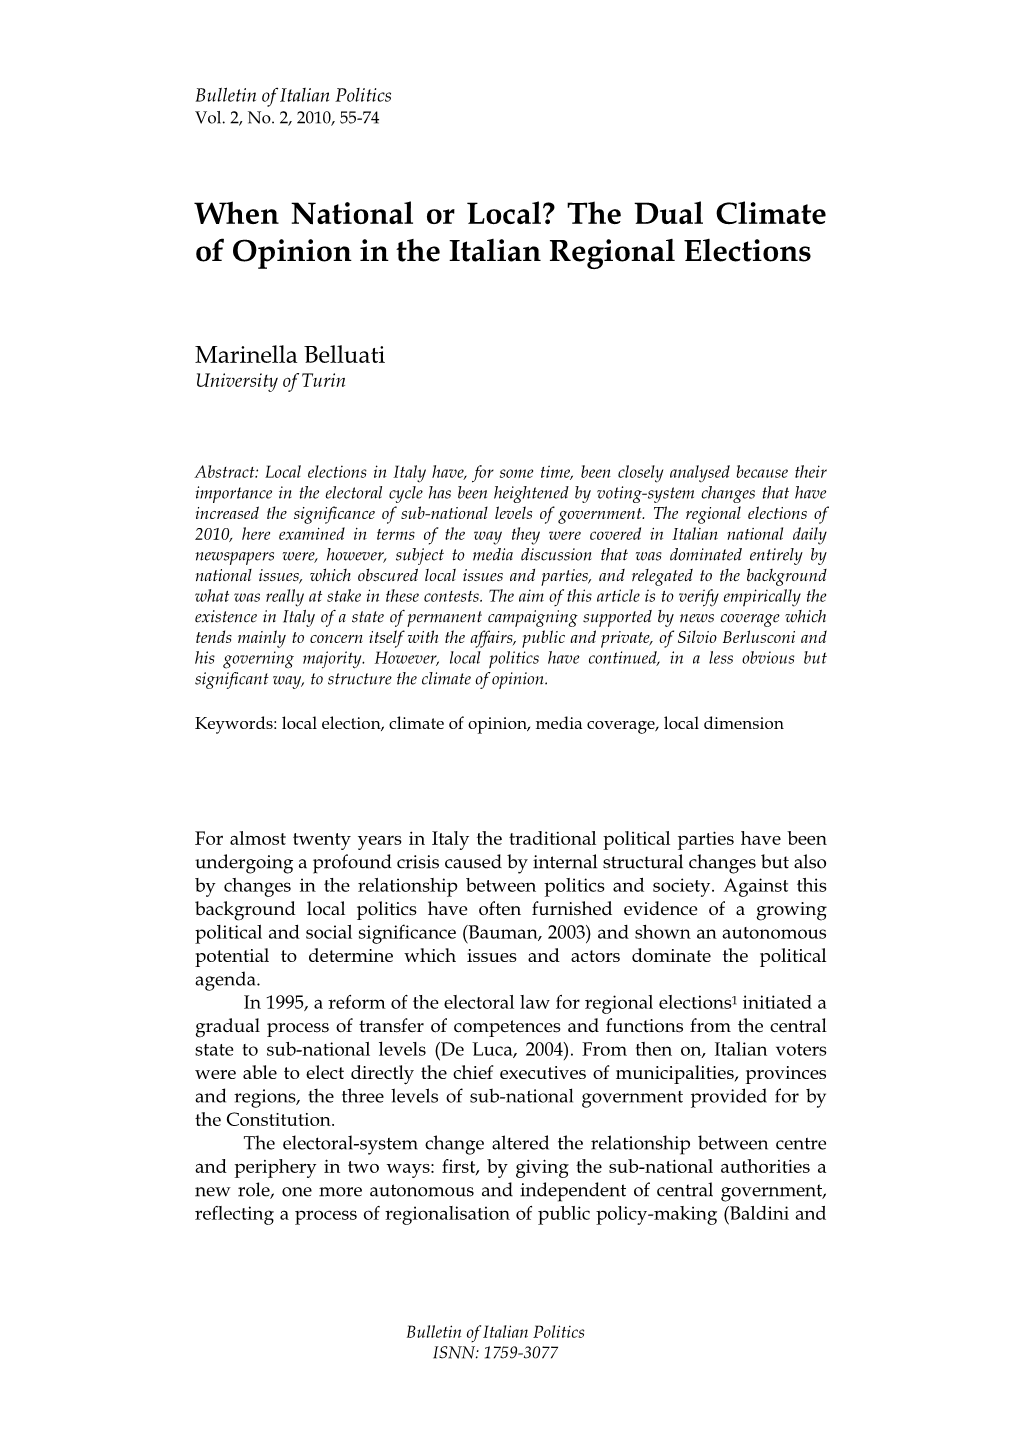 When National Or Local? the Dual Climate of Opinion in the Italian Regional Elections